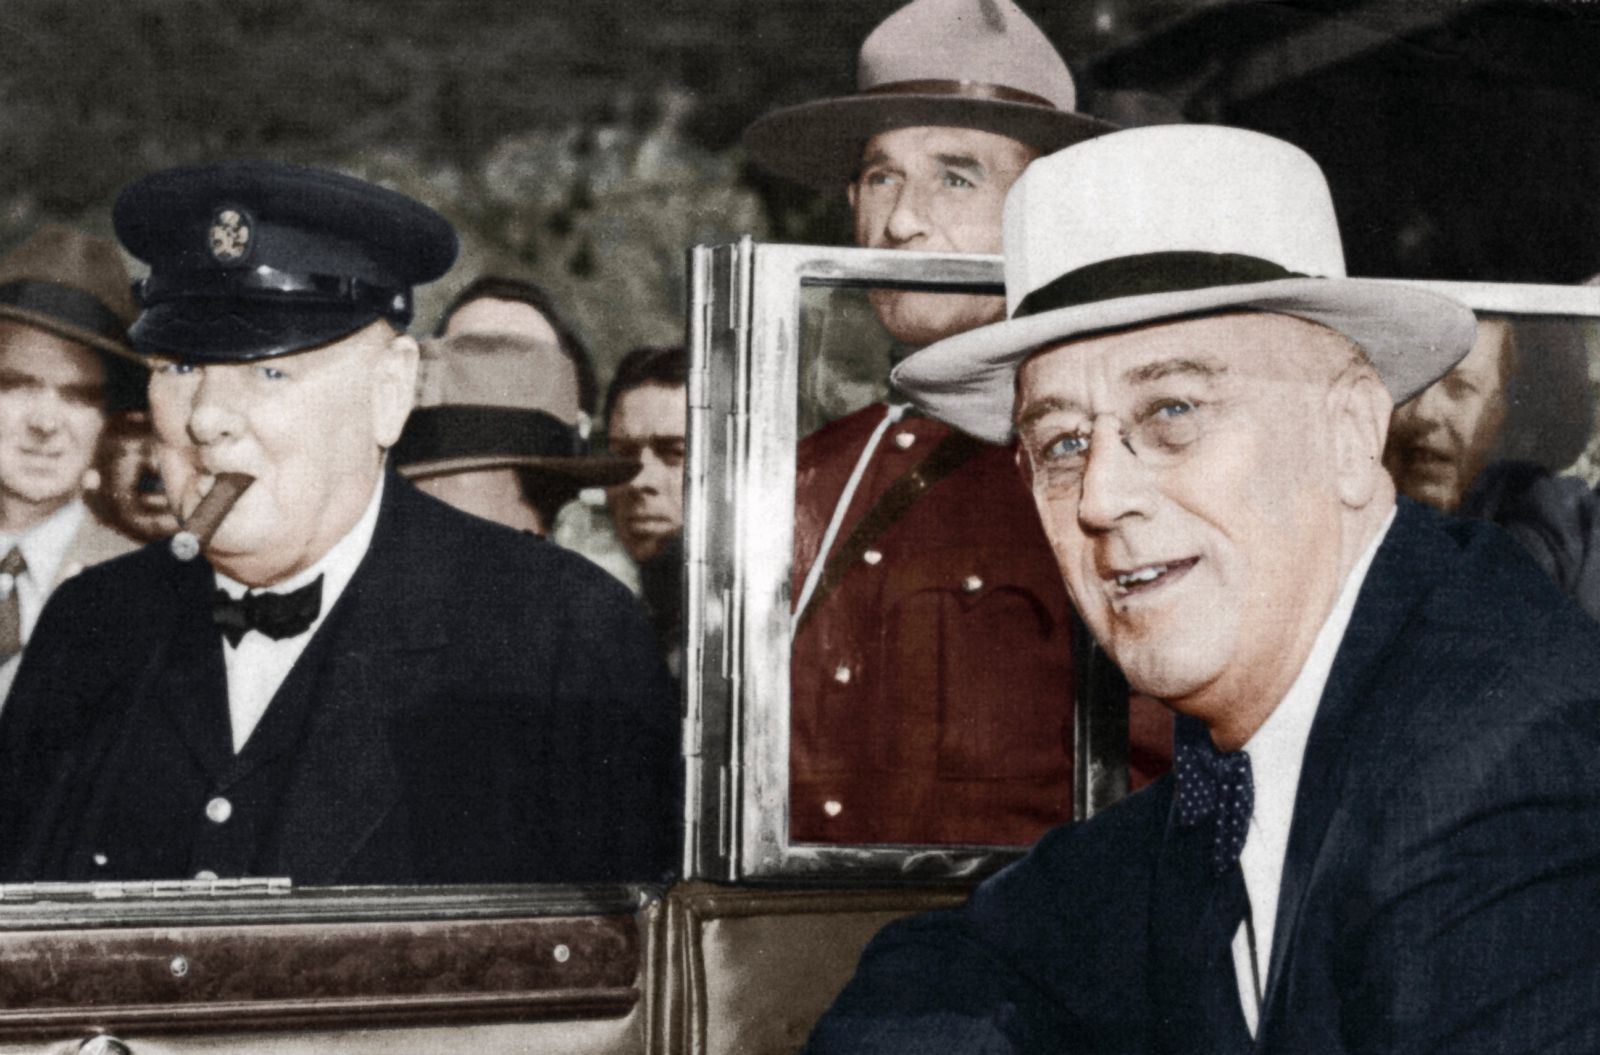 Roosevelt And Churchill Picture History Of The Special Relationship Between U S Presidents